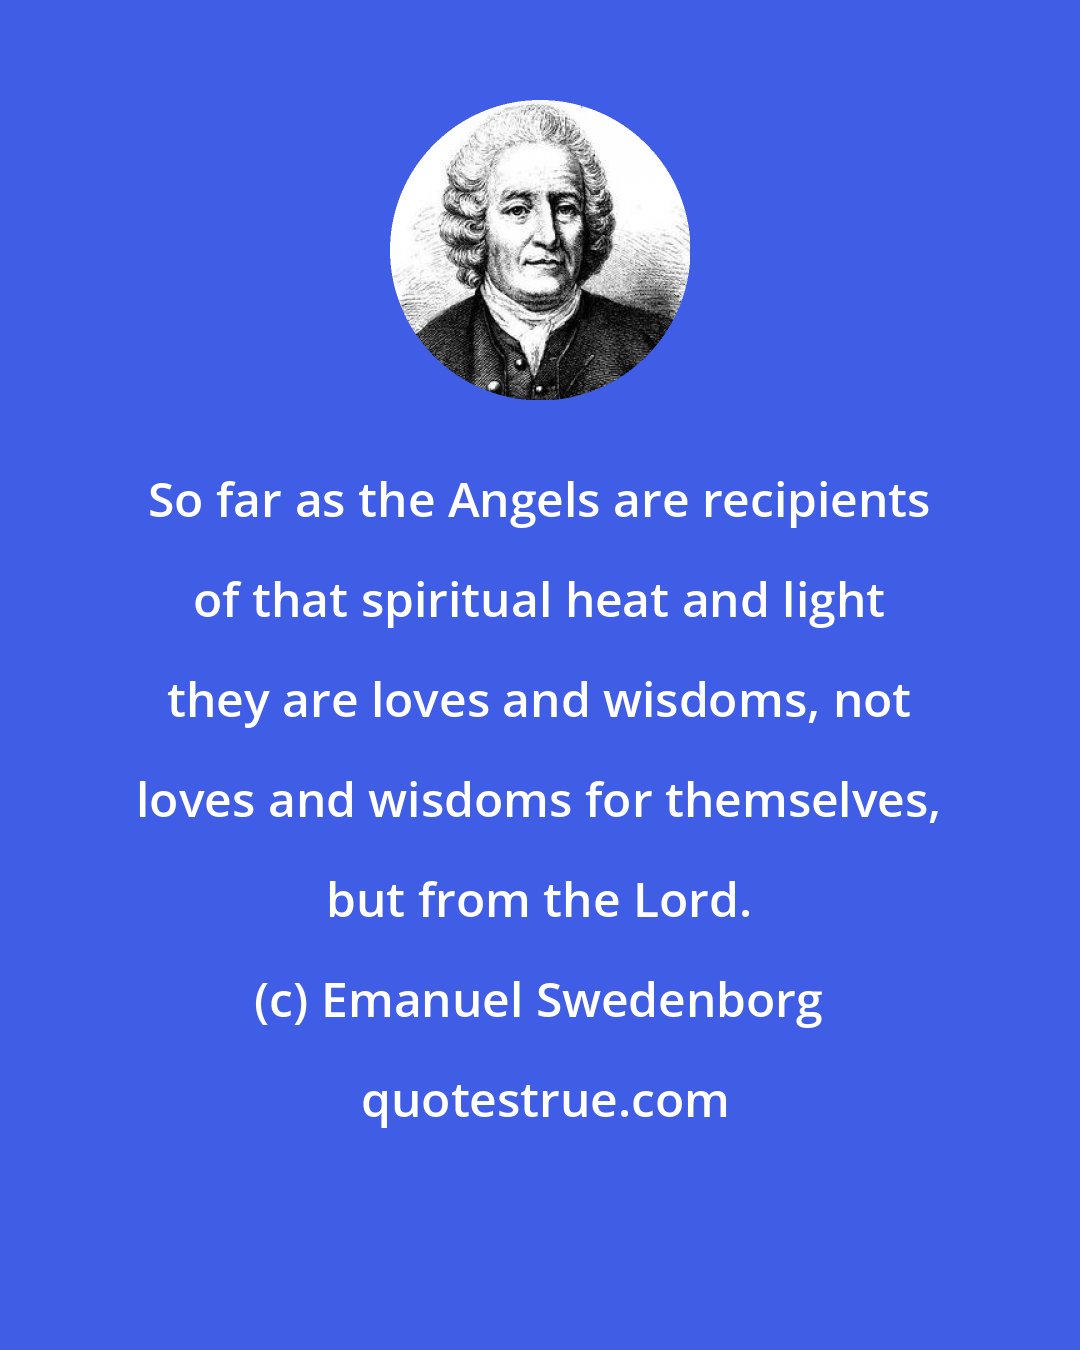 Emanuel Swedenborg: So far as the Angels are recipients of that spiritual heat and light they are loves and wisdoms, not loves and wisdoms for themselves, but from the Lord.